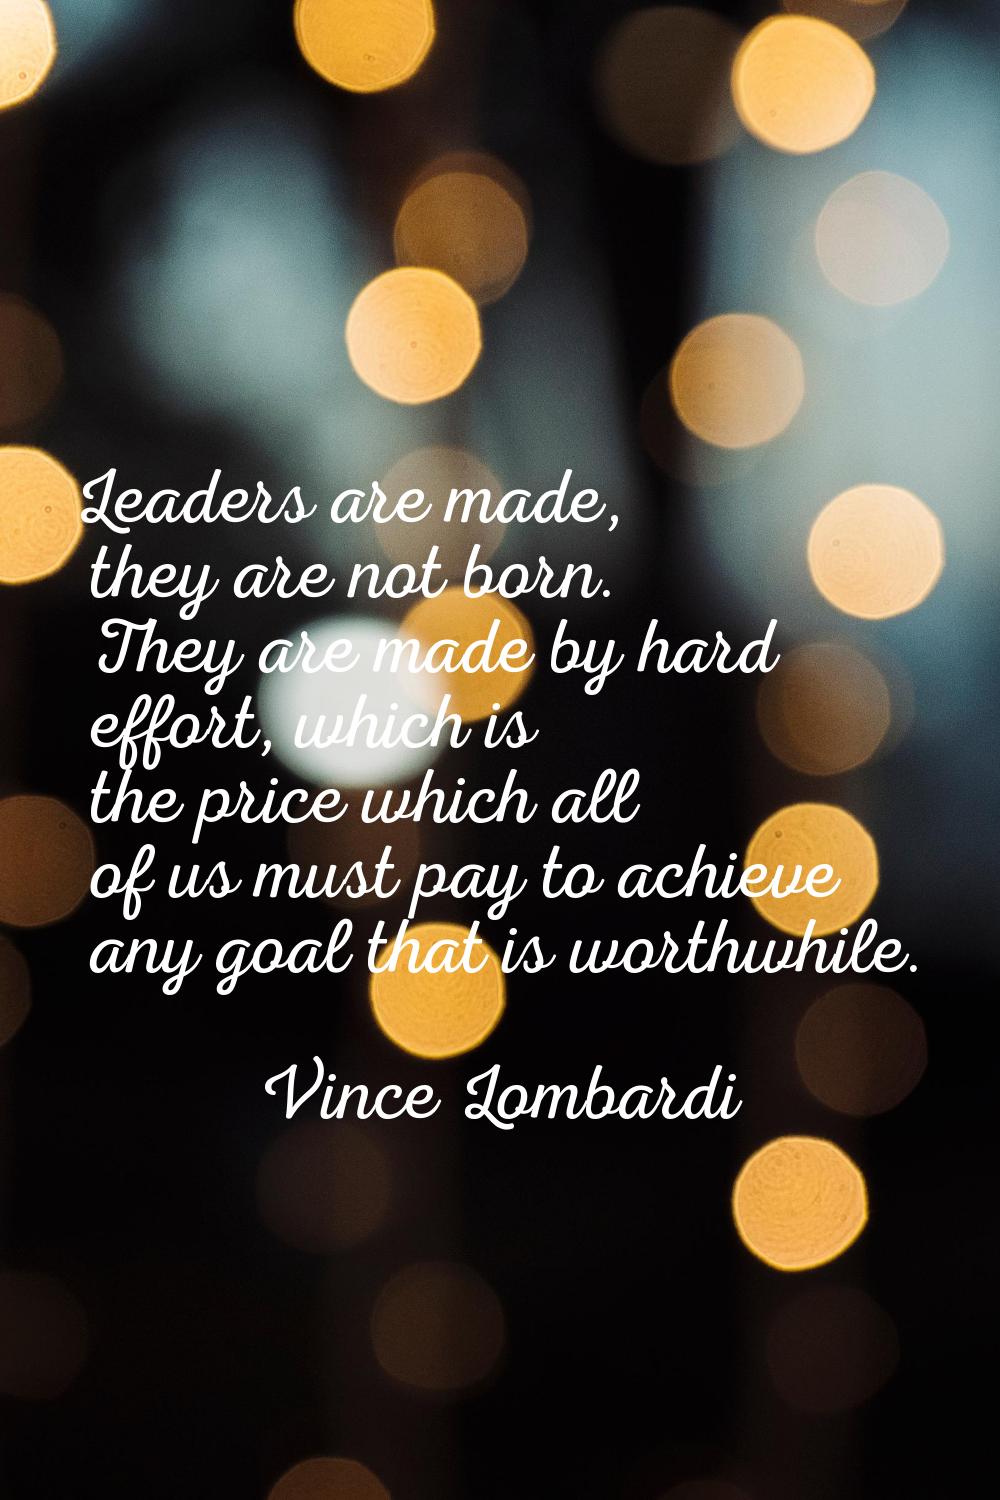 Leaders are made, they are not born. They are made by hard effort, which is the price which all of 